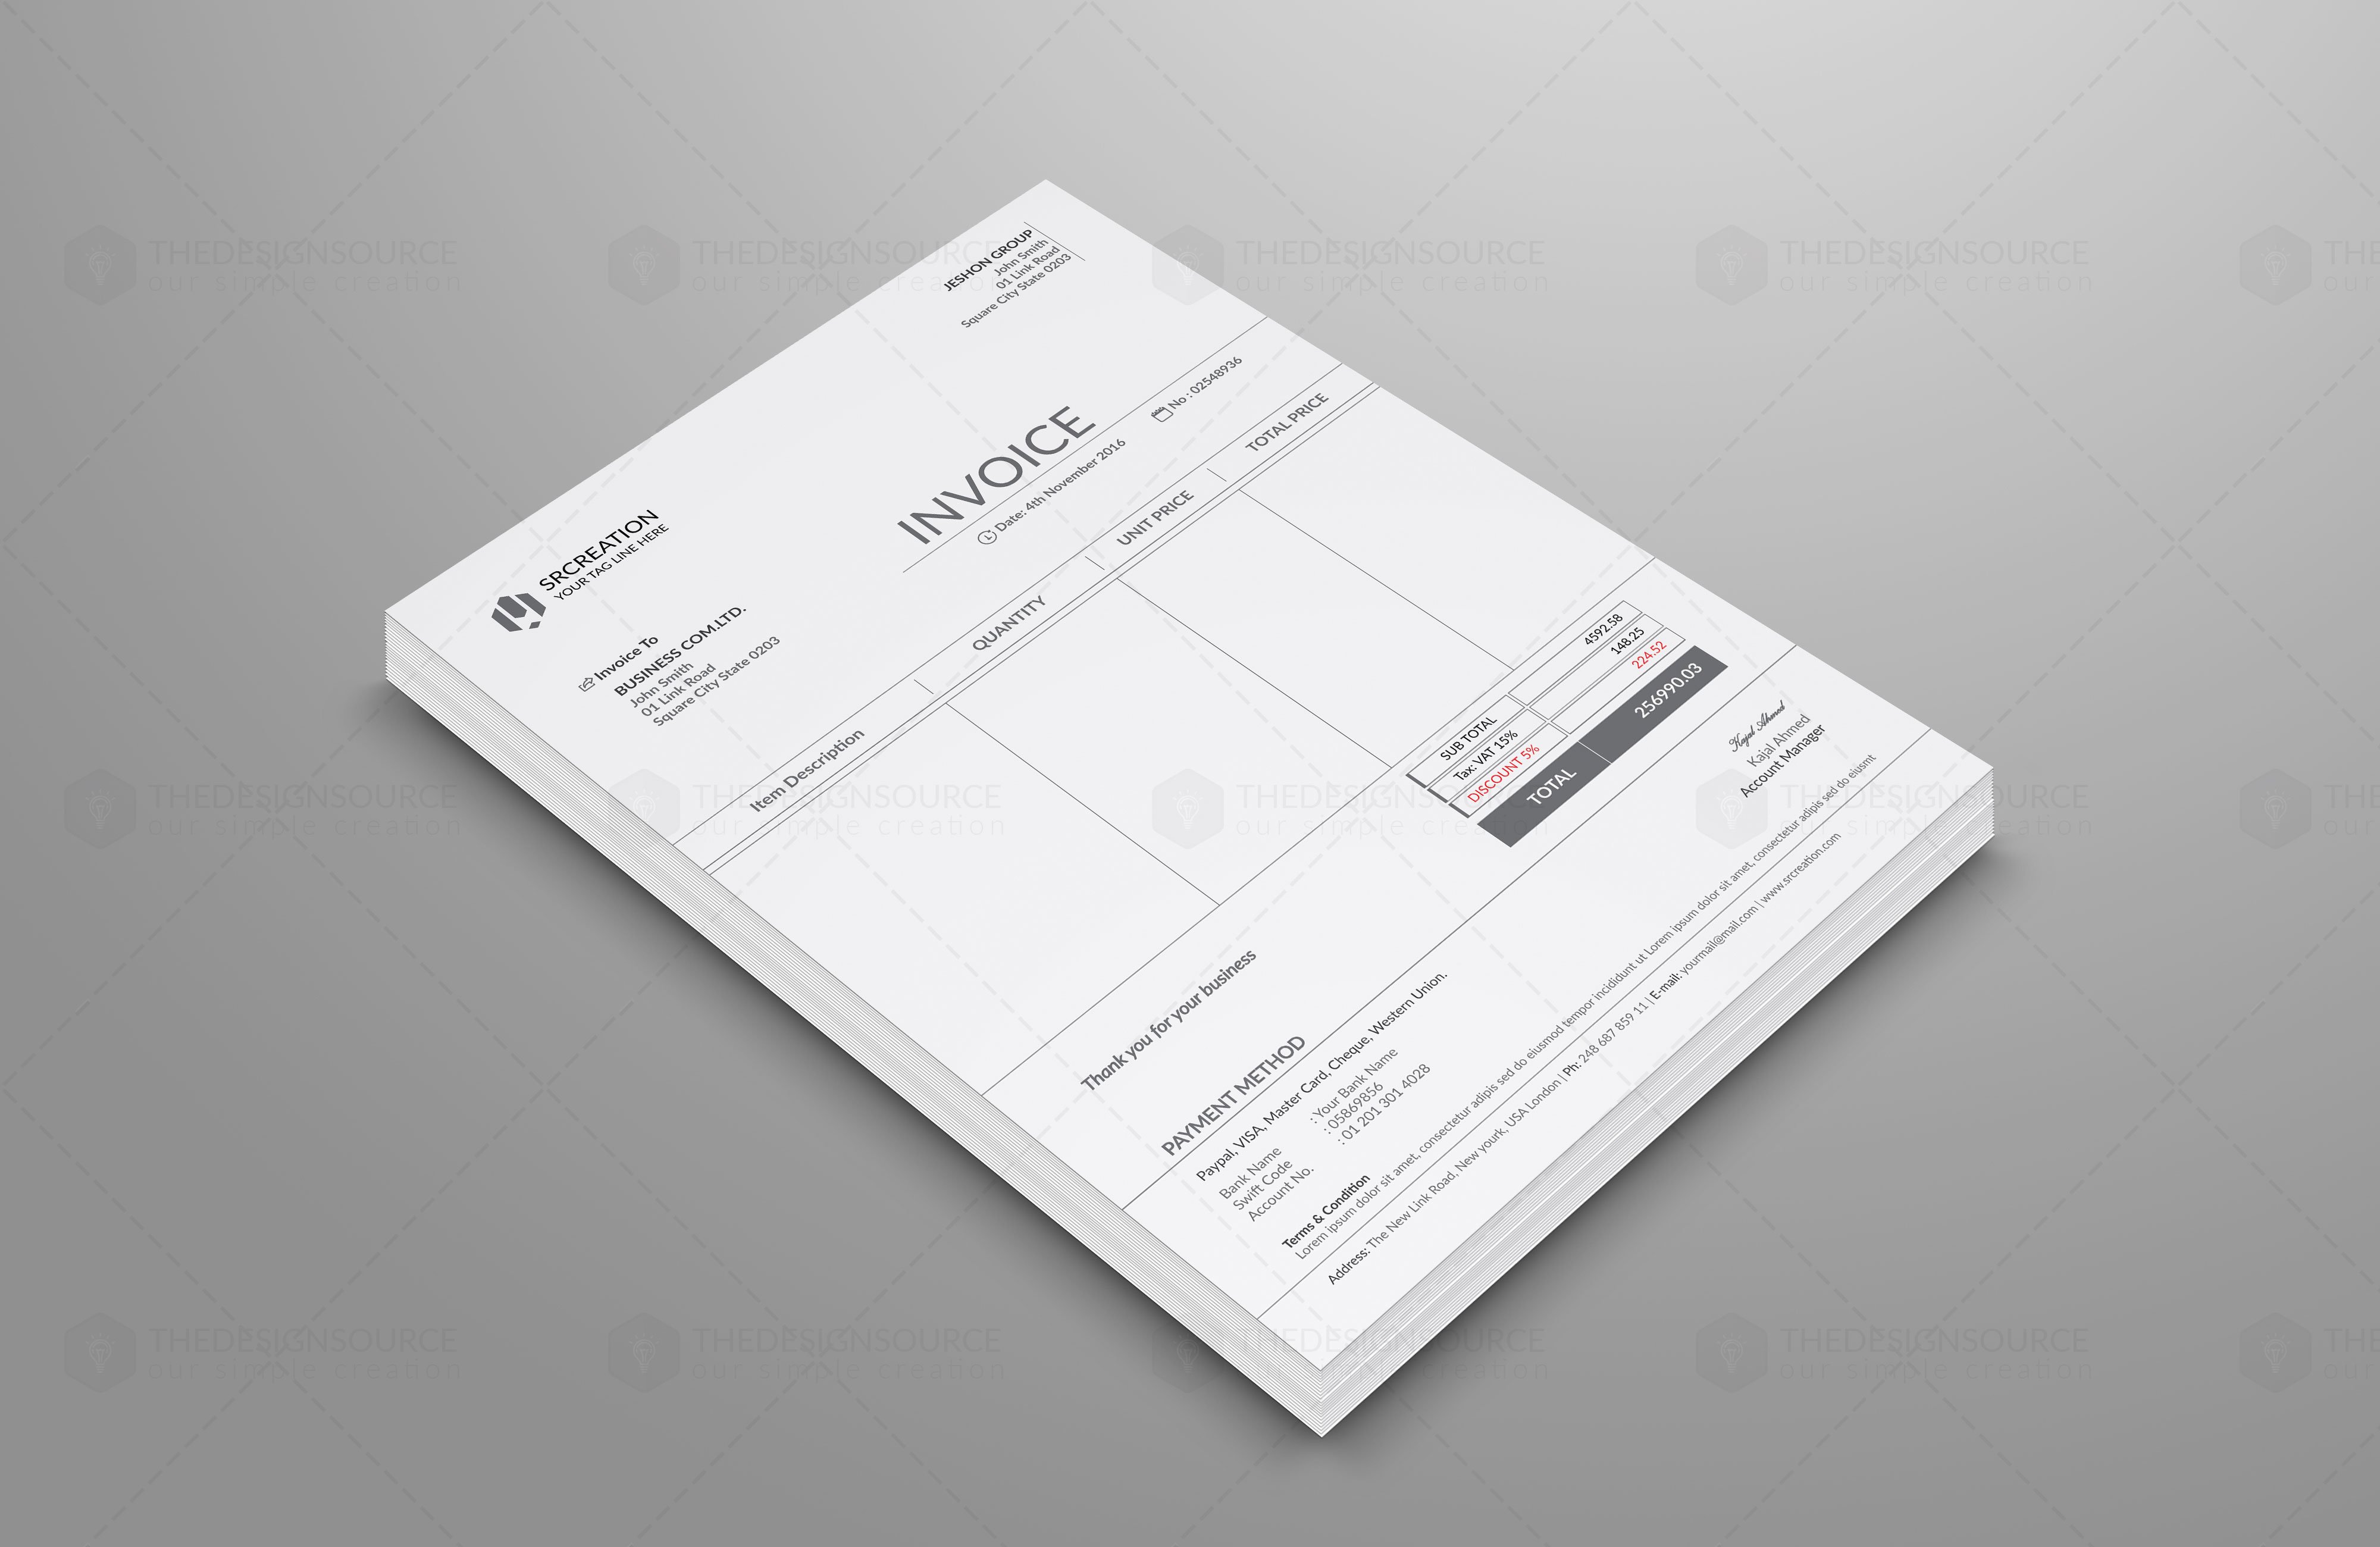 INVOICE ONE cover image.